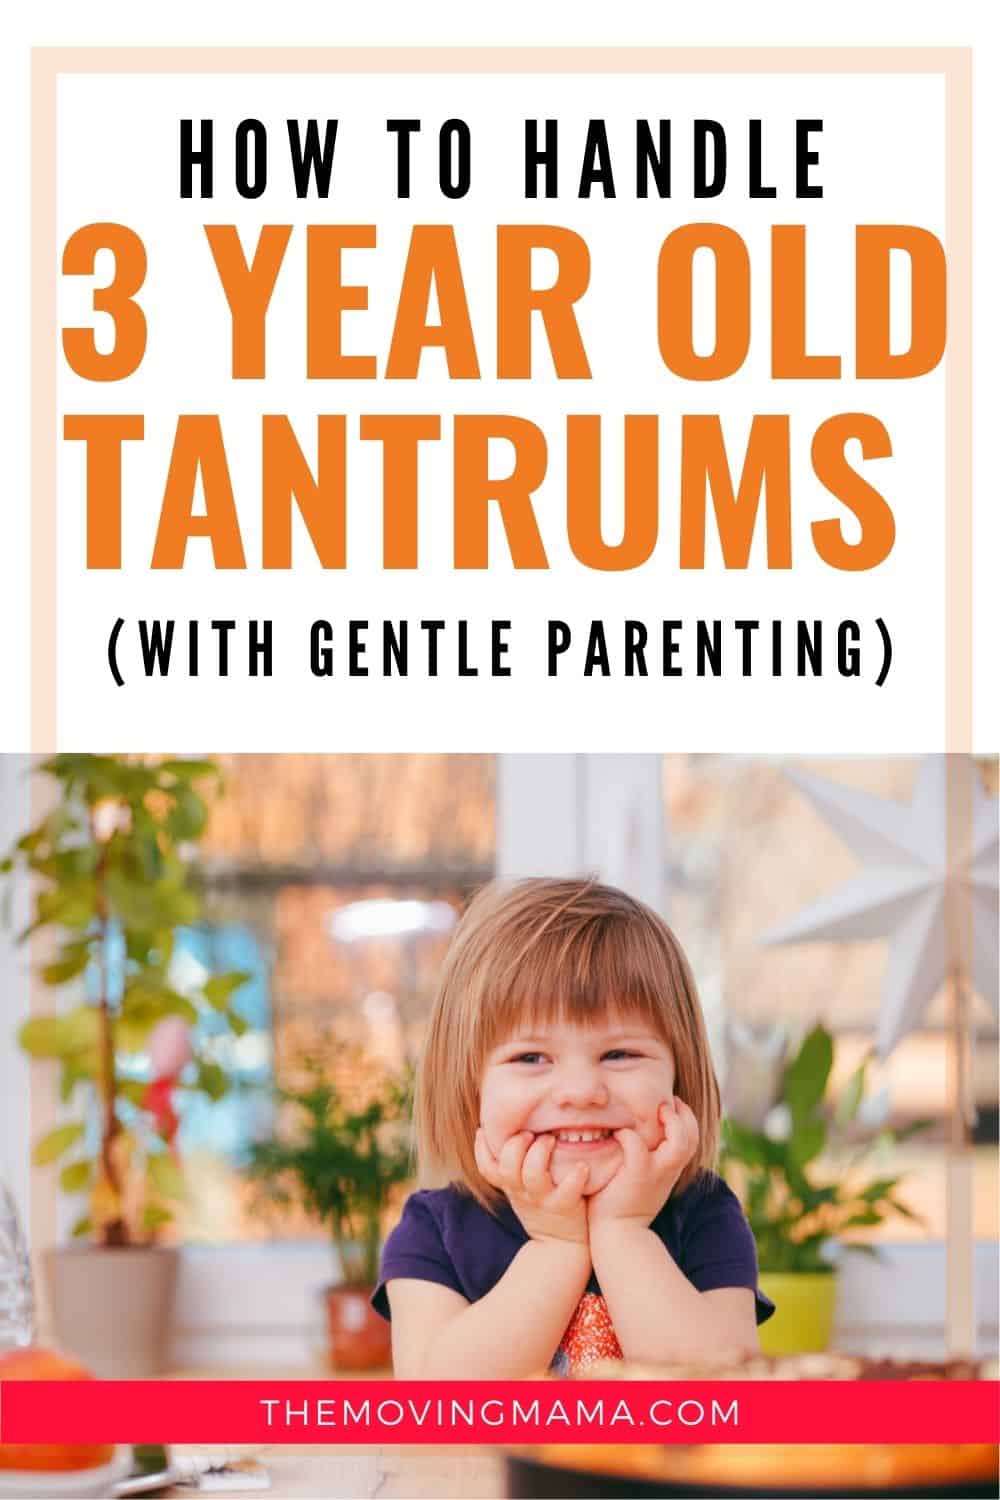 How to handle 3 year old tantrums with gentle parenting